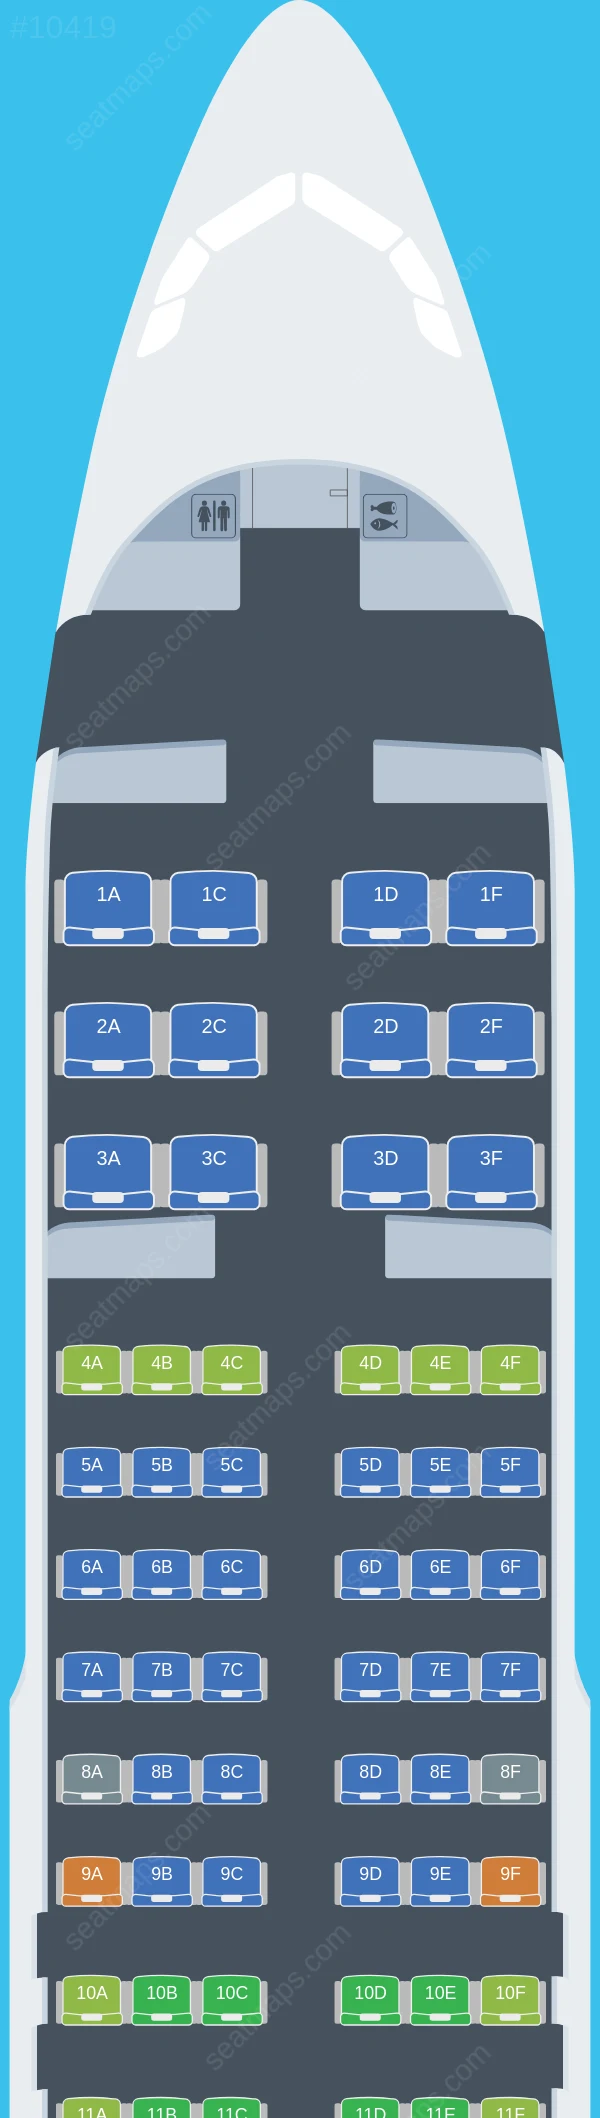 flyCAA Airbus A320-200 V.2 seatmap preview